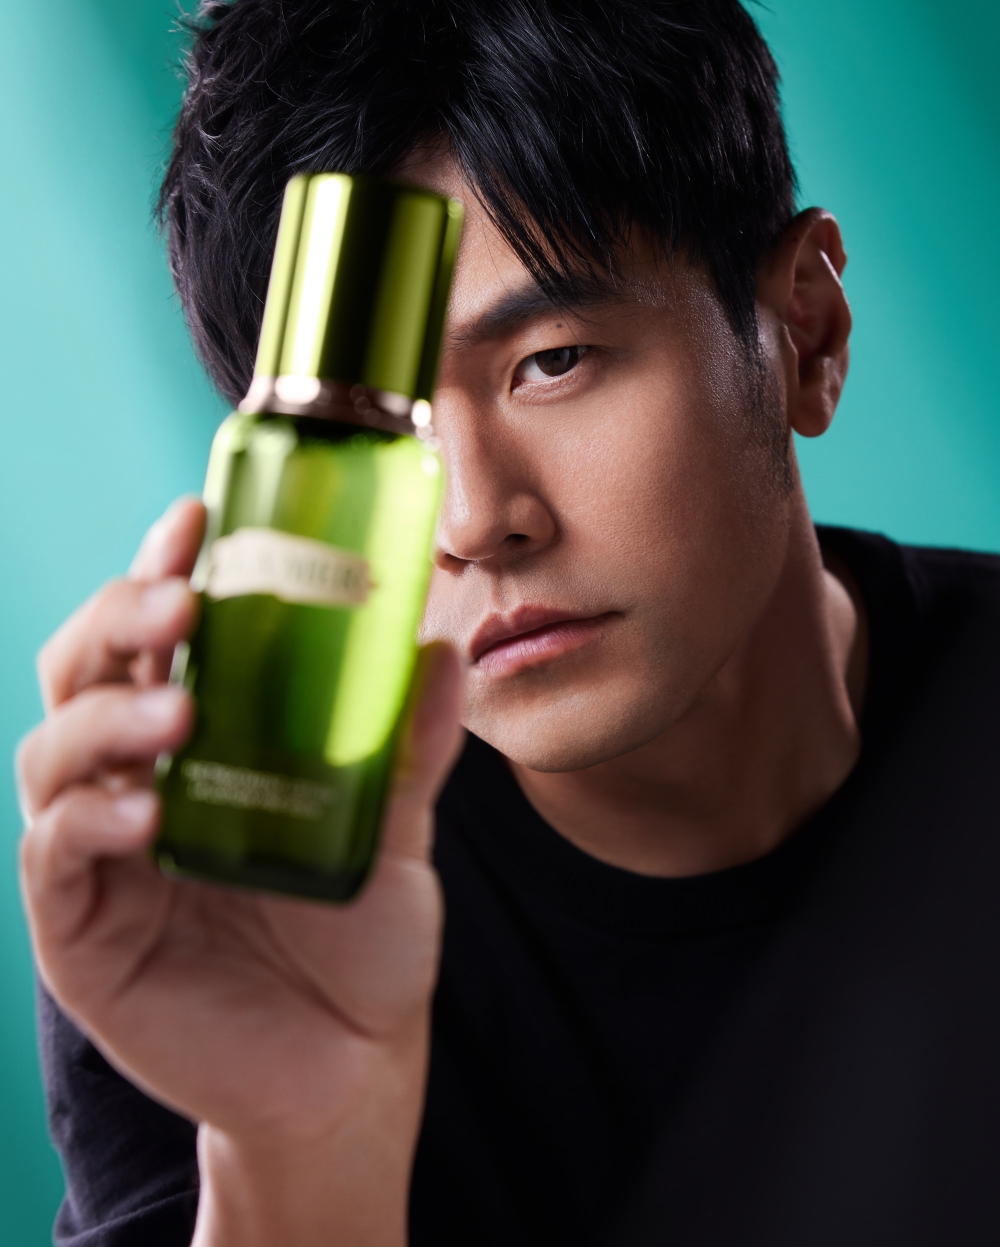 In his first campaign for the brand, Chou is seen with The Treatment Lotion. — Picture courtesy of La Mer